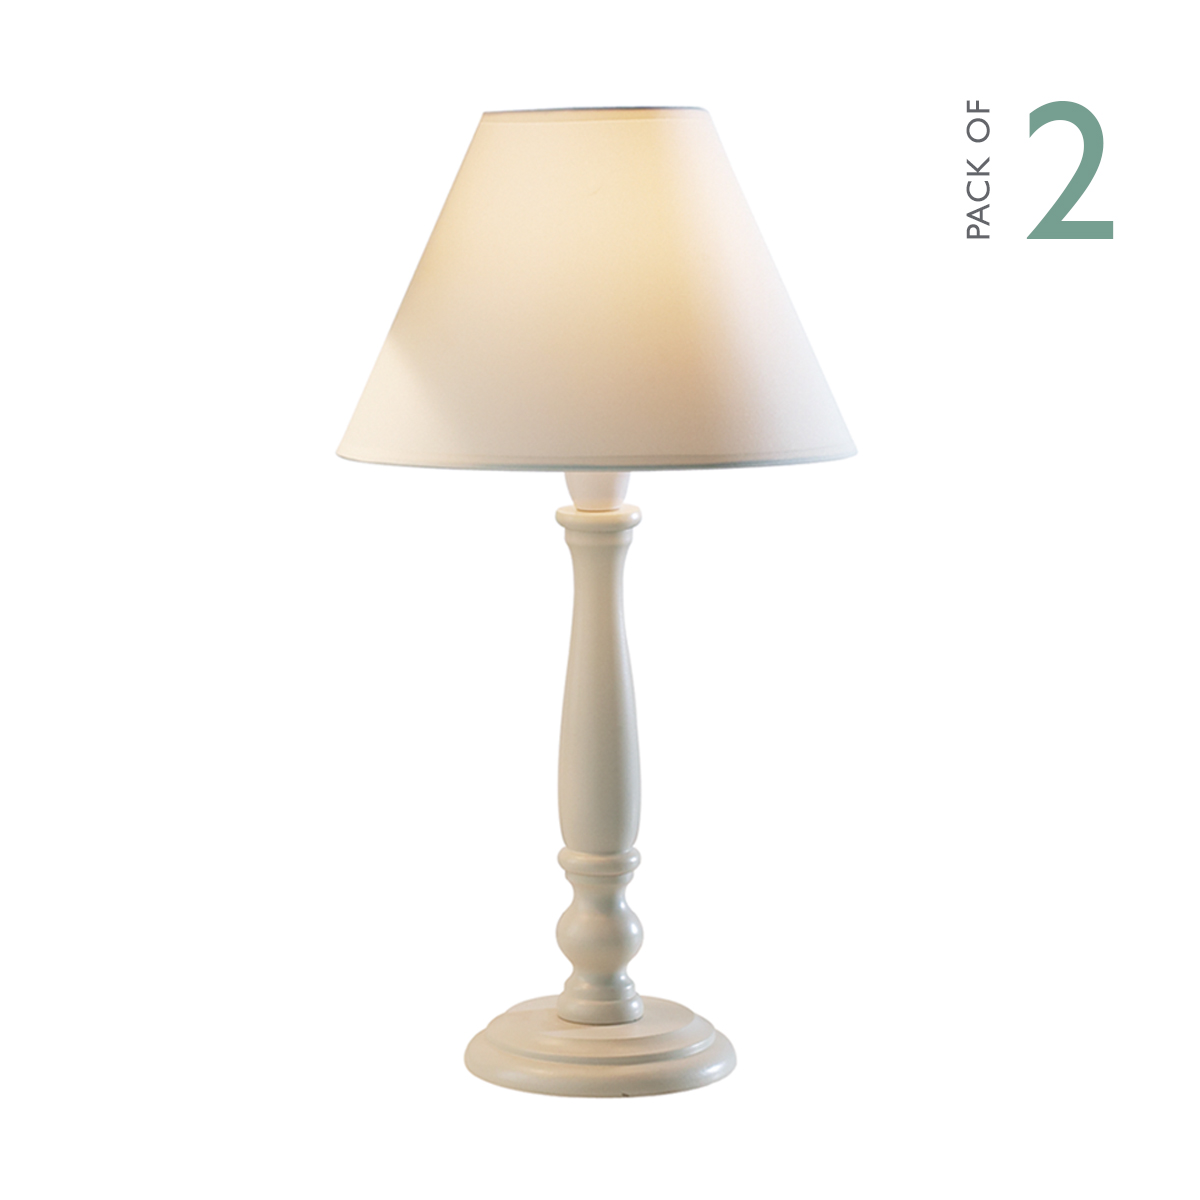 Regal Table Lamp 10 Inch Cream Complete, Very Small Table Lamps Uk